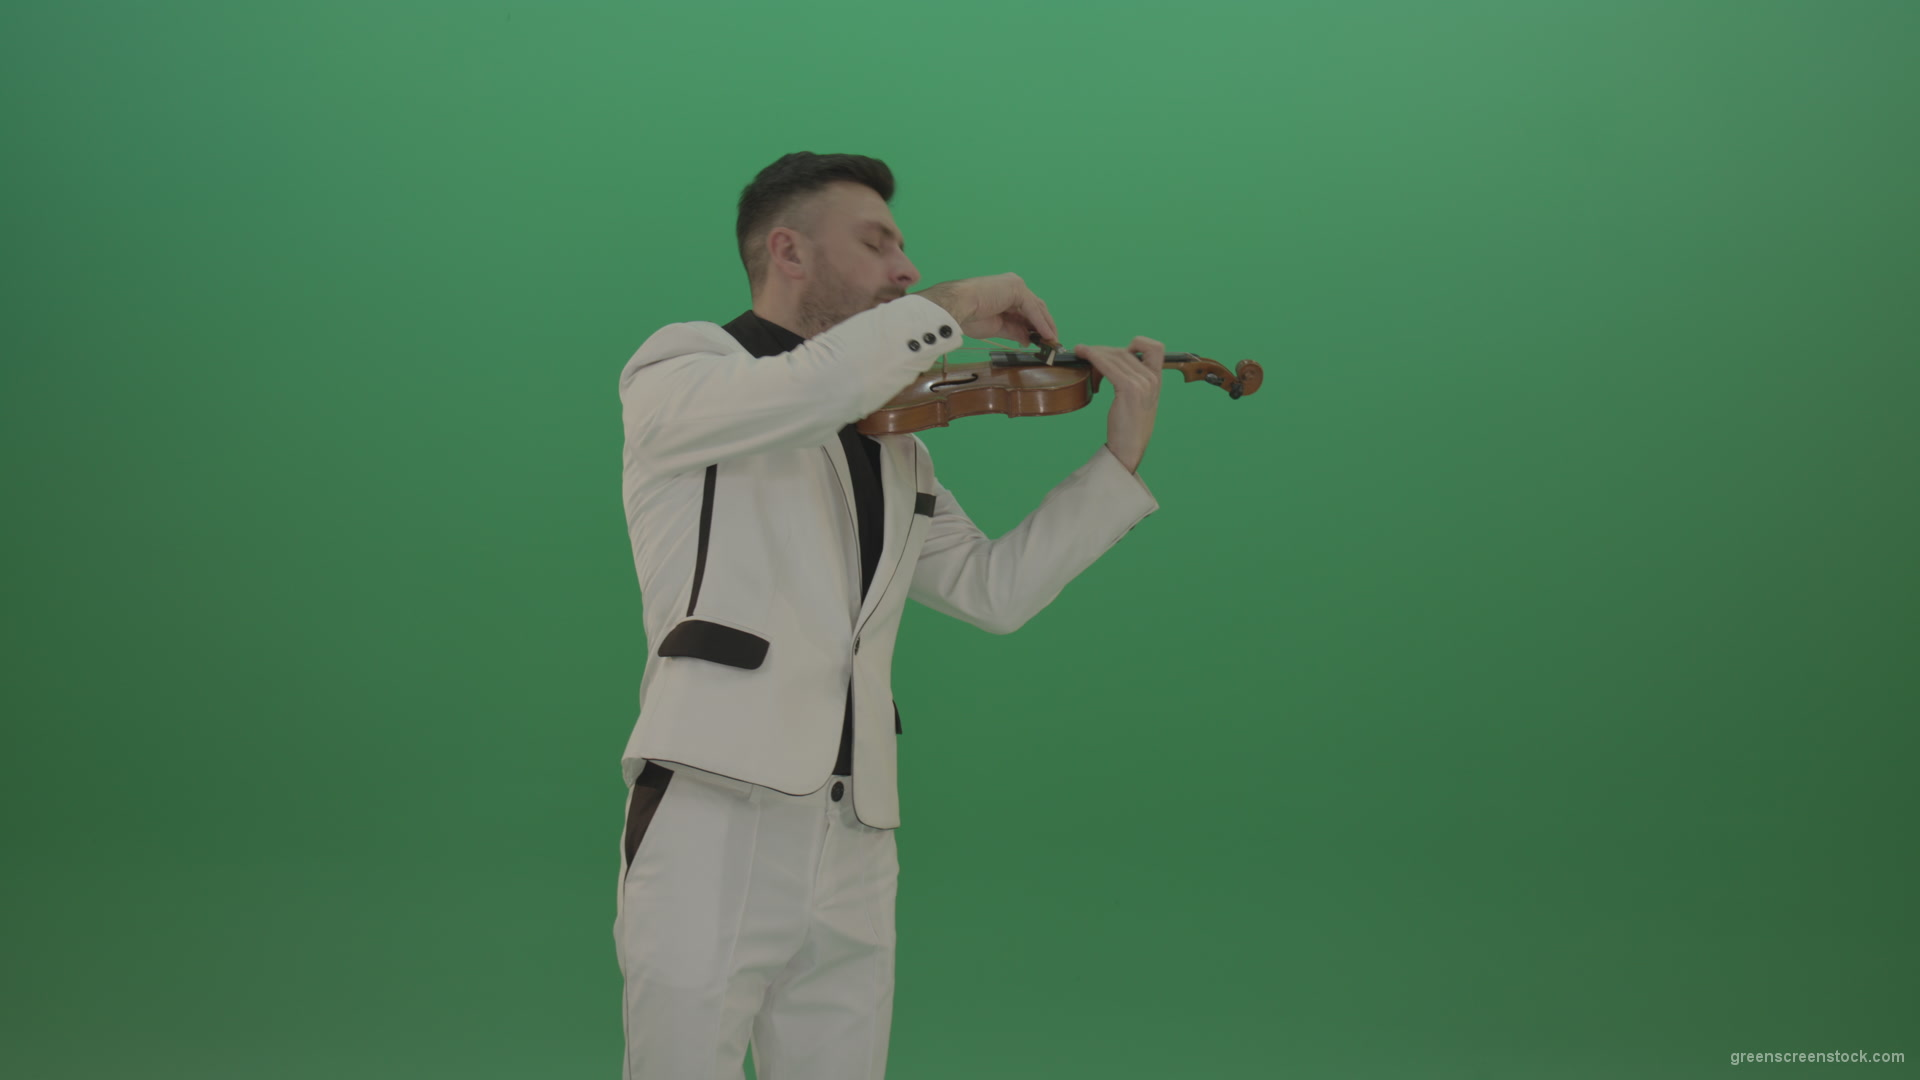 Man-is-playing-slow-love-in-white-costume-on-violin-Fiddle-string-music-instrument-isolated-on-green-screen_005 Green Screen Stock